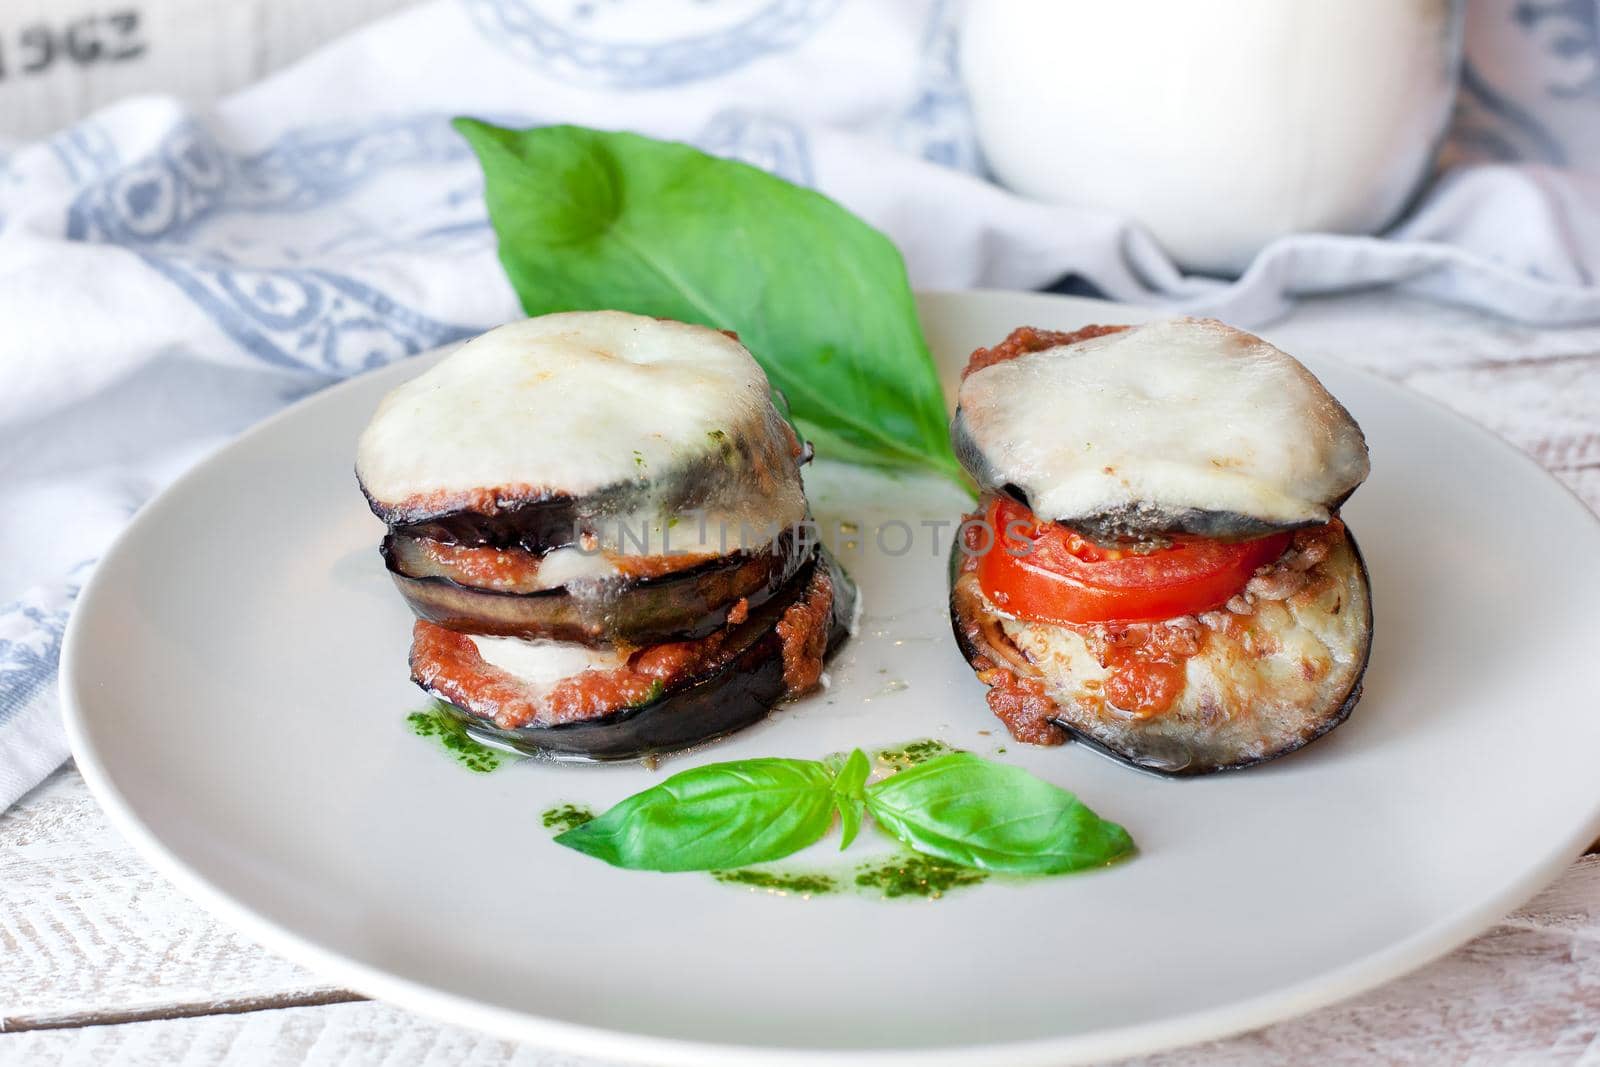 Parmigiana di melanzane: baked eggplant - italy, sicily cousine. On the wooden table.